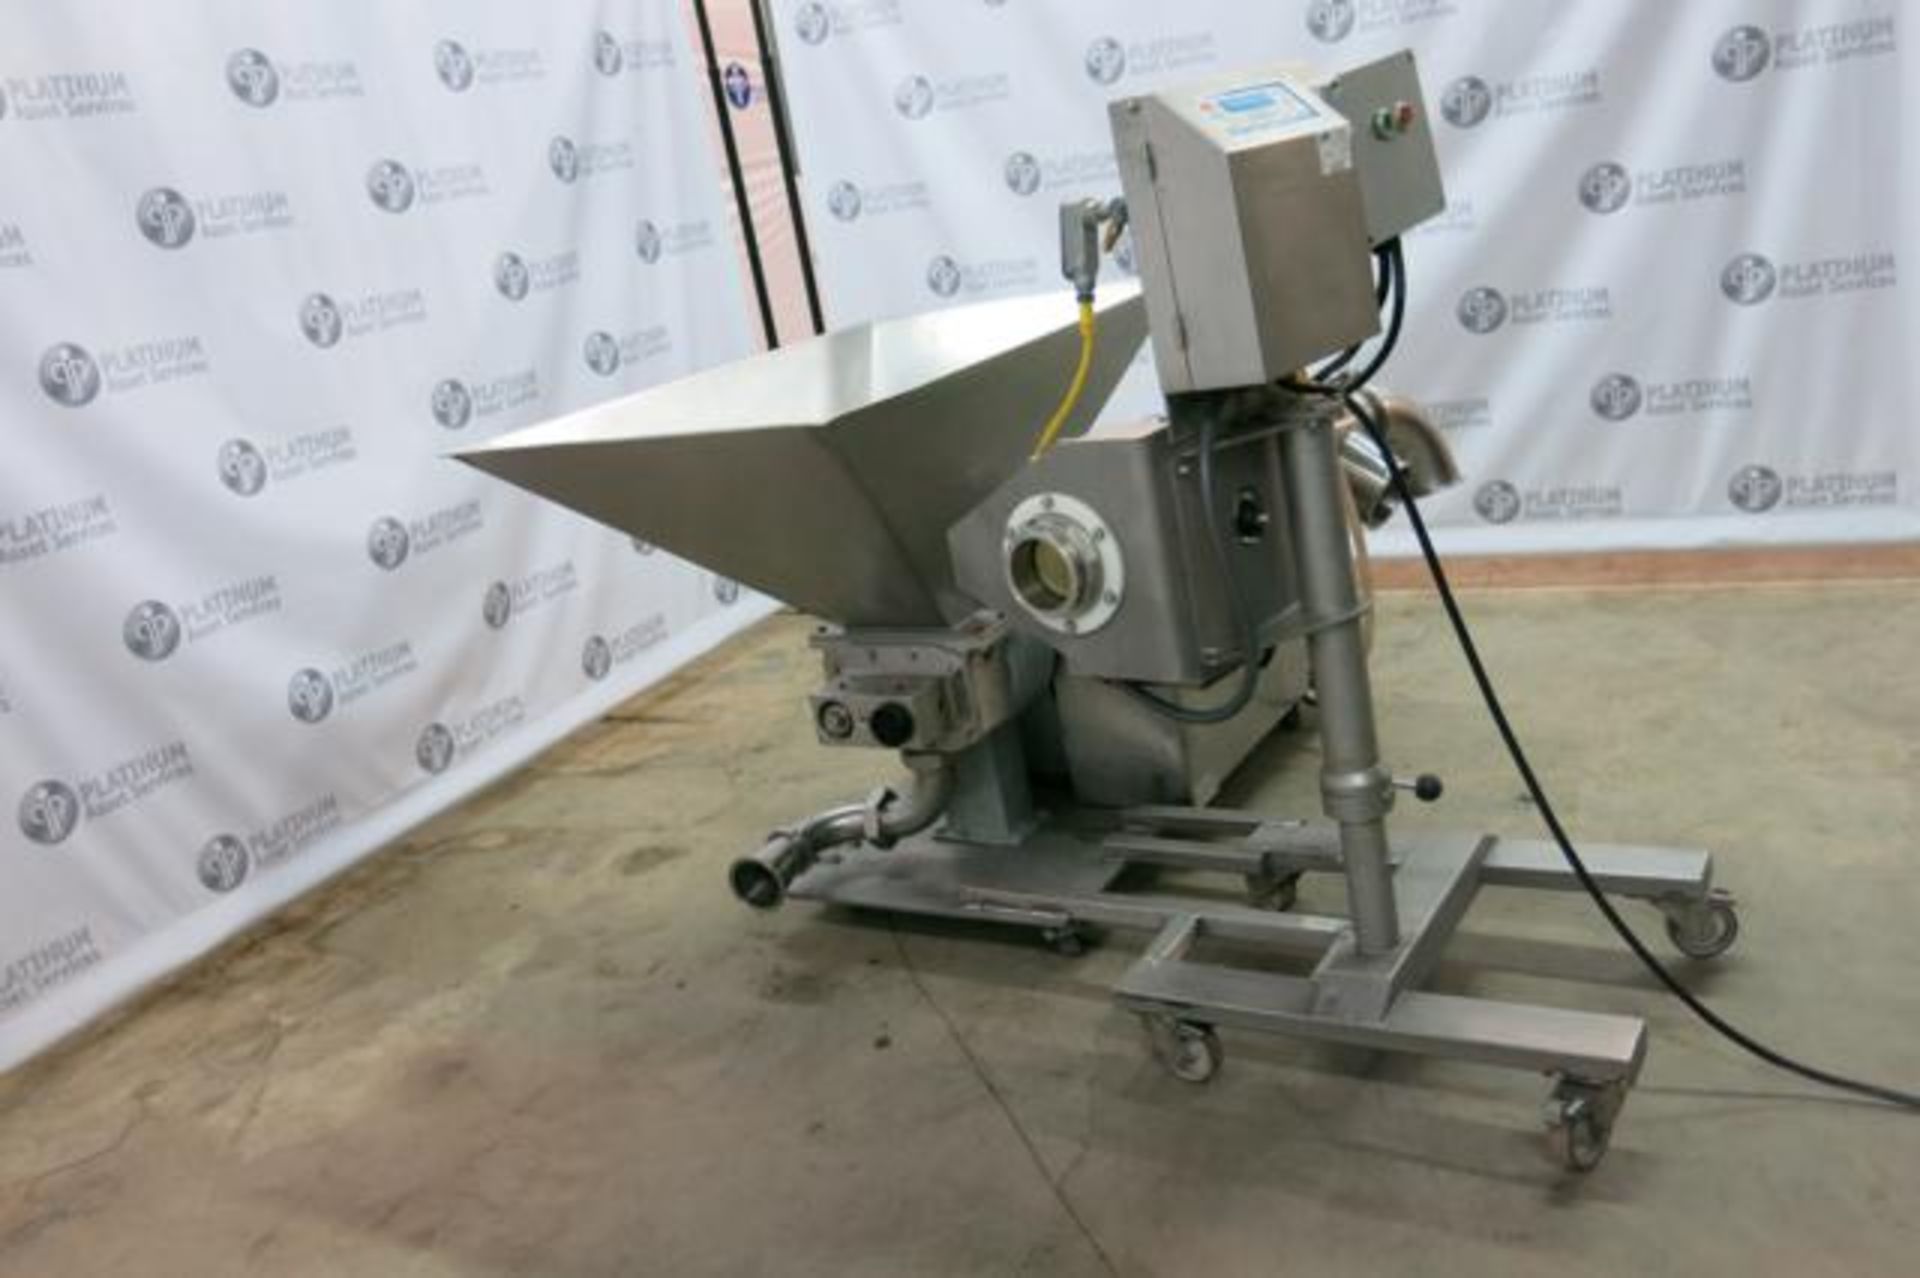 LOMA, IQ2, STAINLESS STEEL, PIPELINE, METAL DETECTOR, 4", 2003, S/N QP12033 - Image 4 of 11